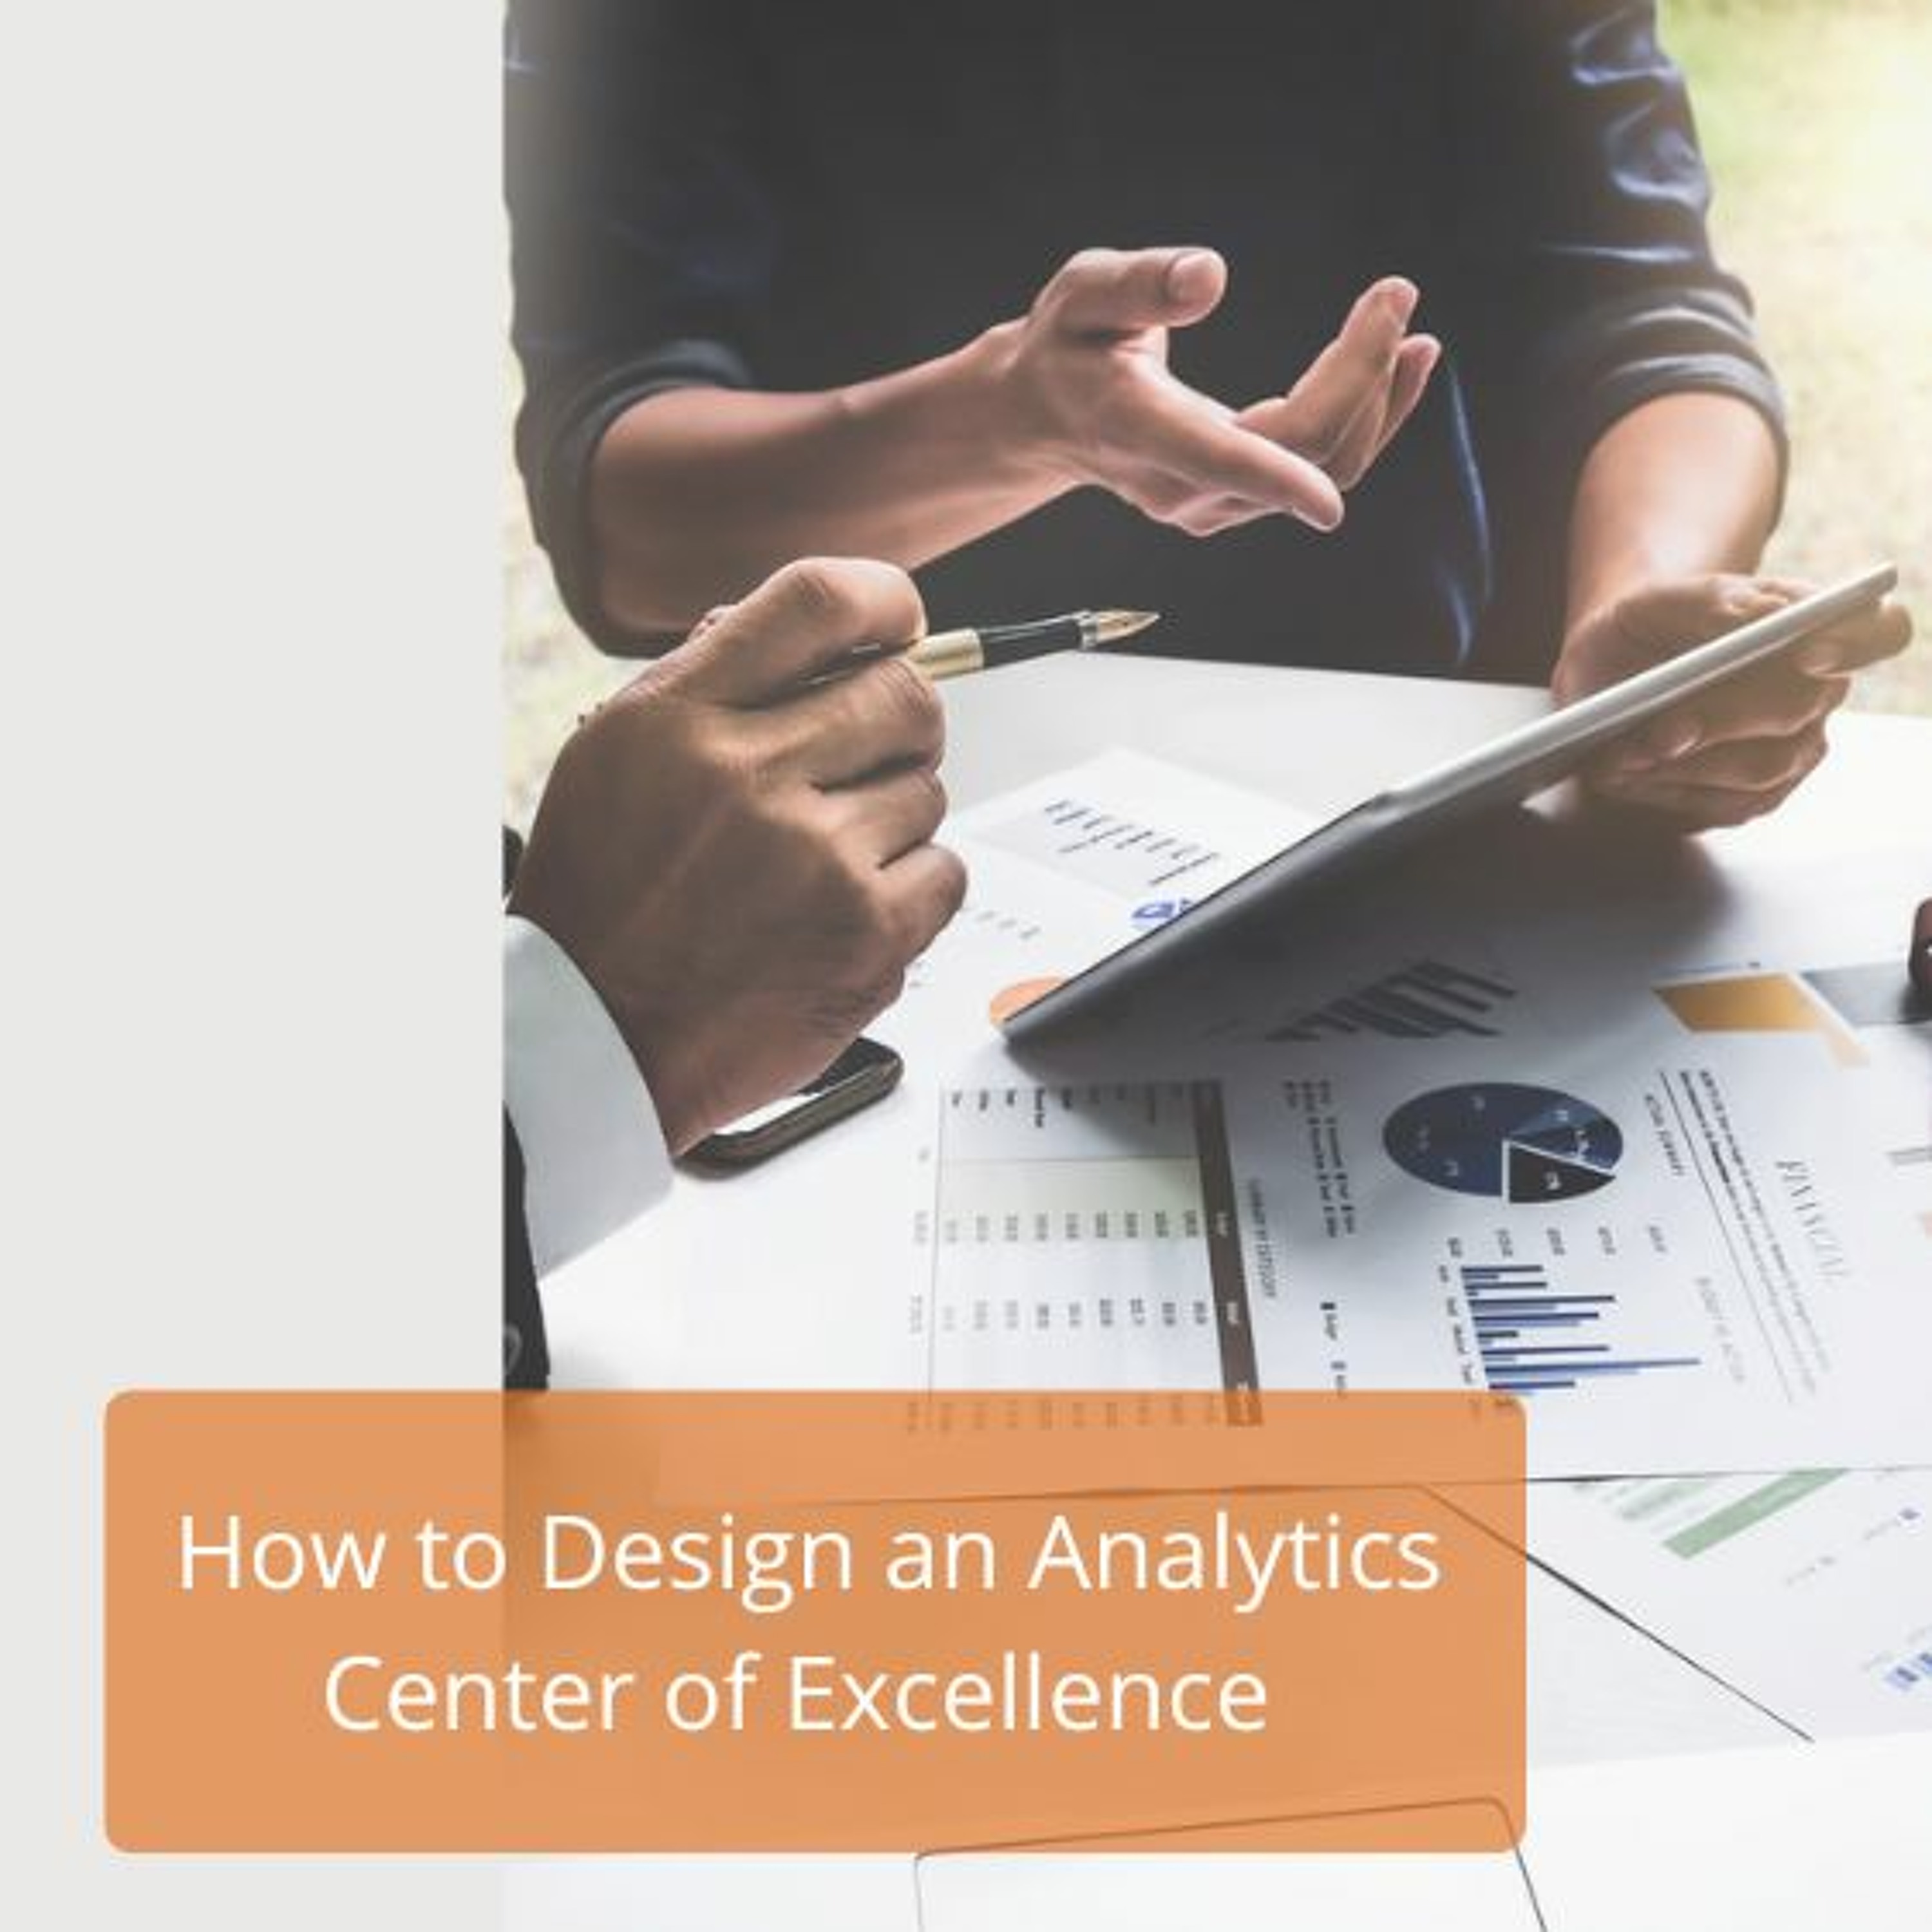 How To Design An Analytics Center Of Excellence - Audio Blog